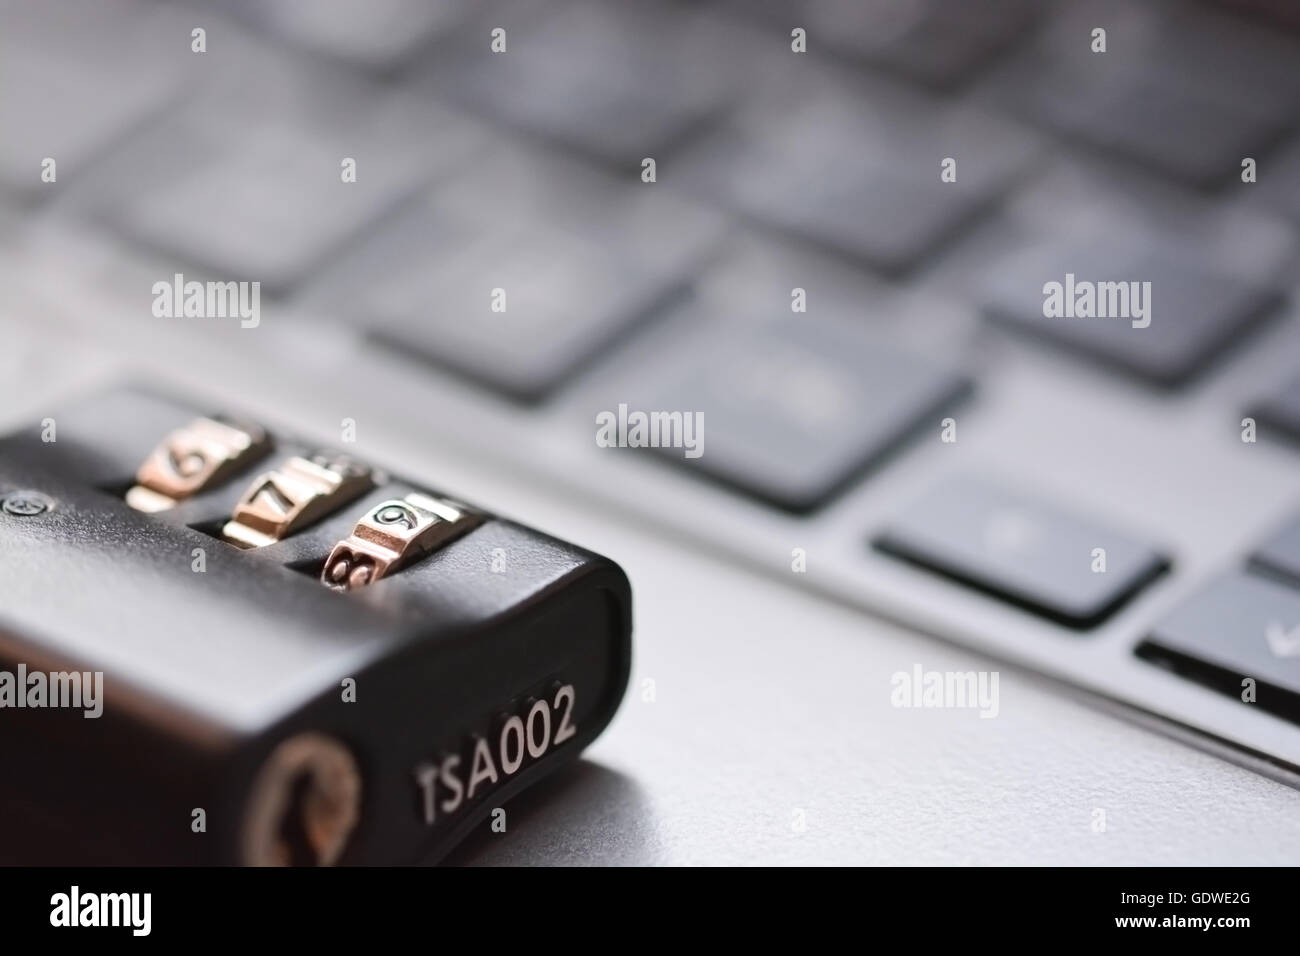 IT security concept with lock on keyboard Stock Photo